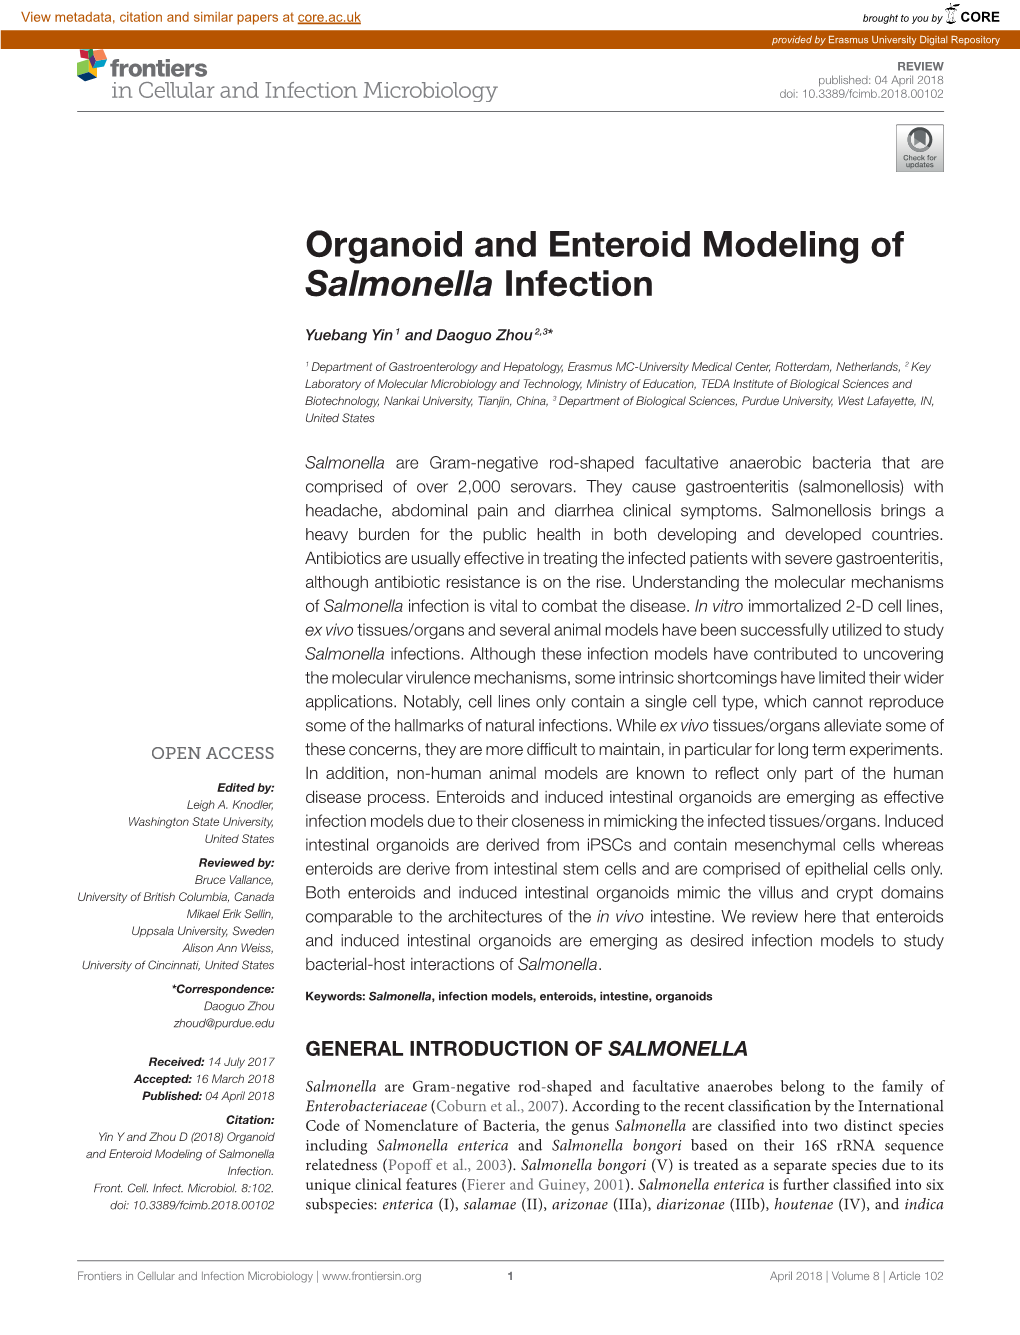 Organoid and Enteroid Modeling of Salmonella Infection